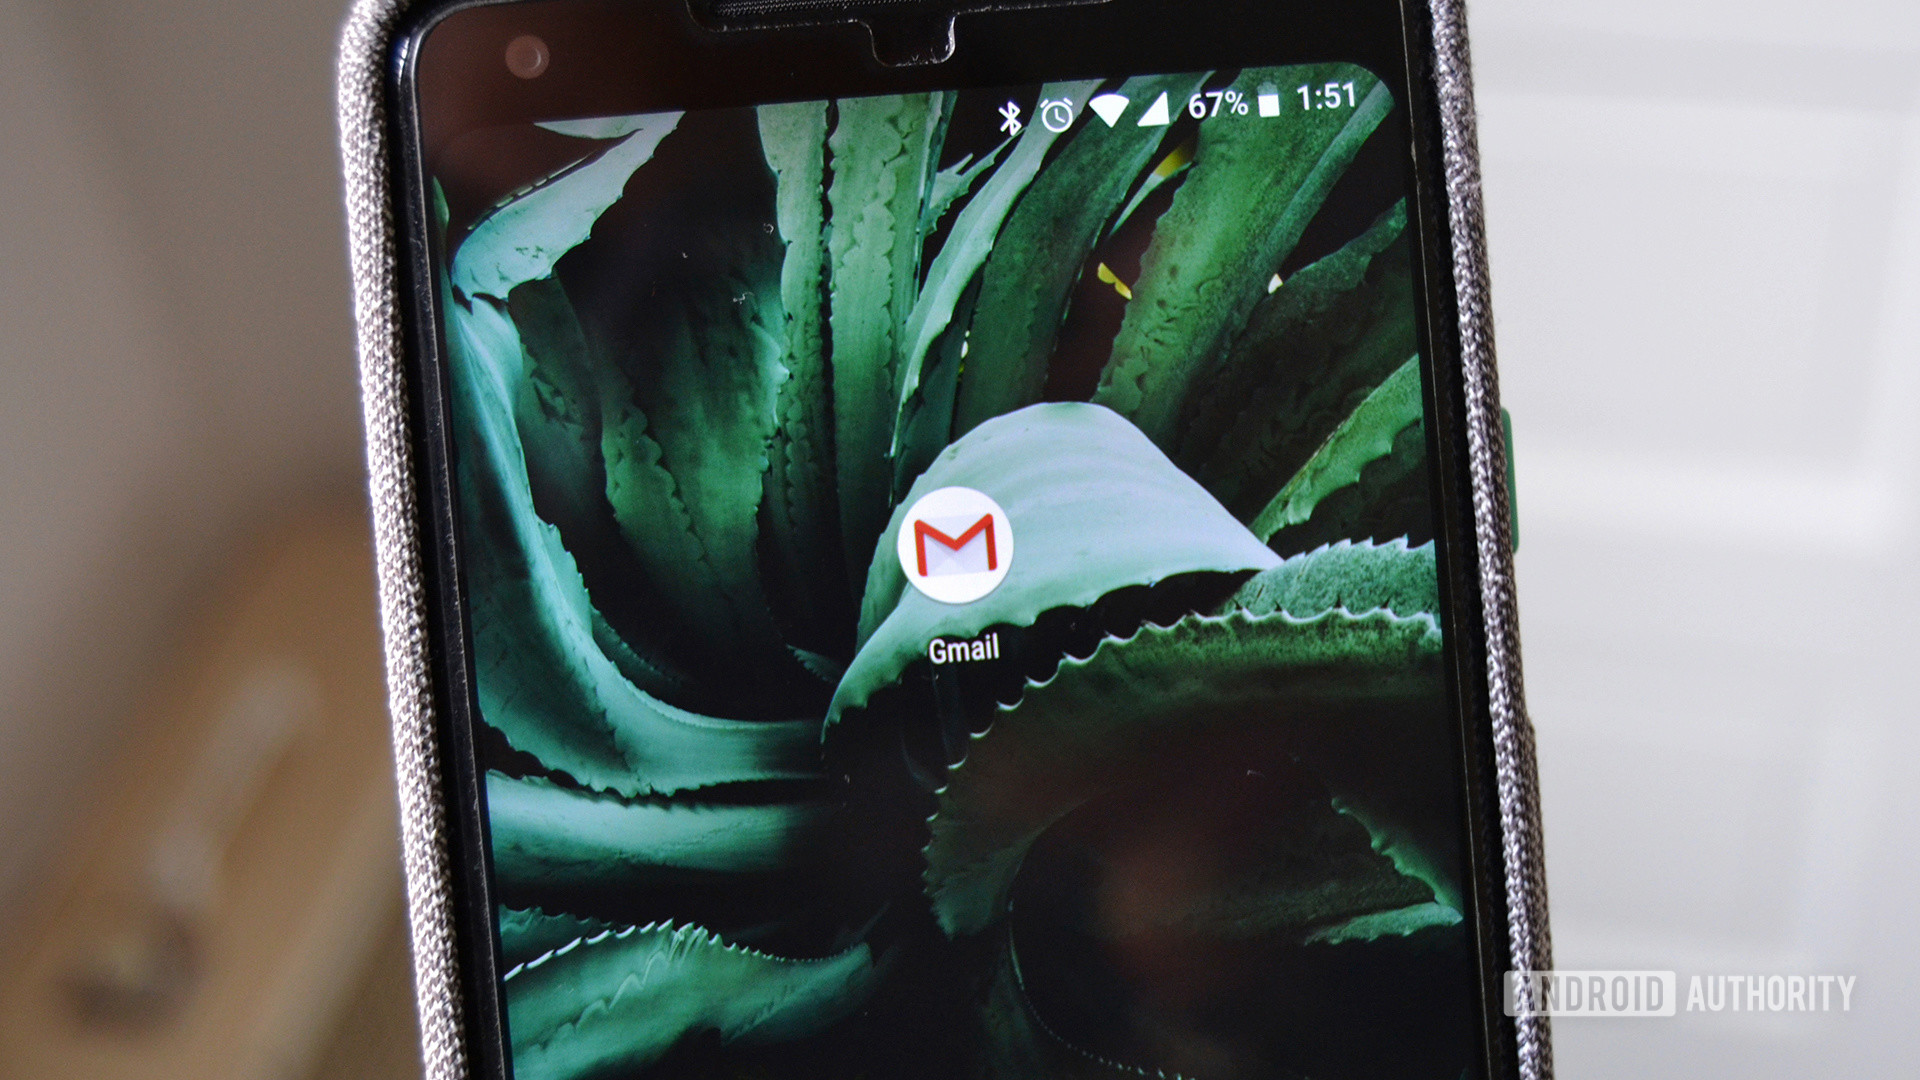 Gmail app icon on the Pixel 2 XL's homescreen.